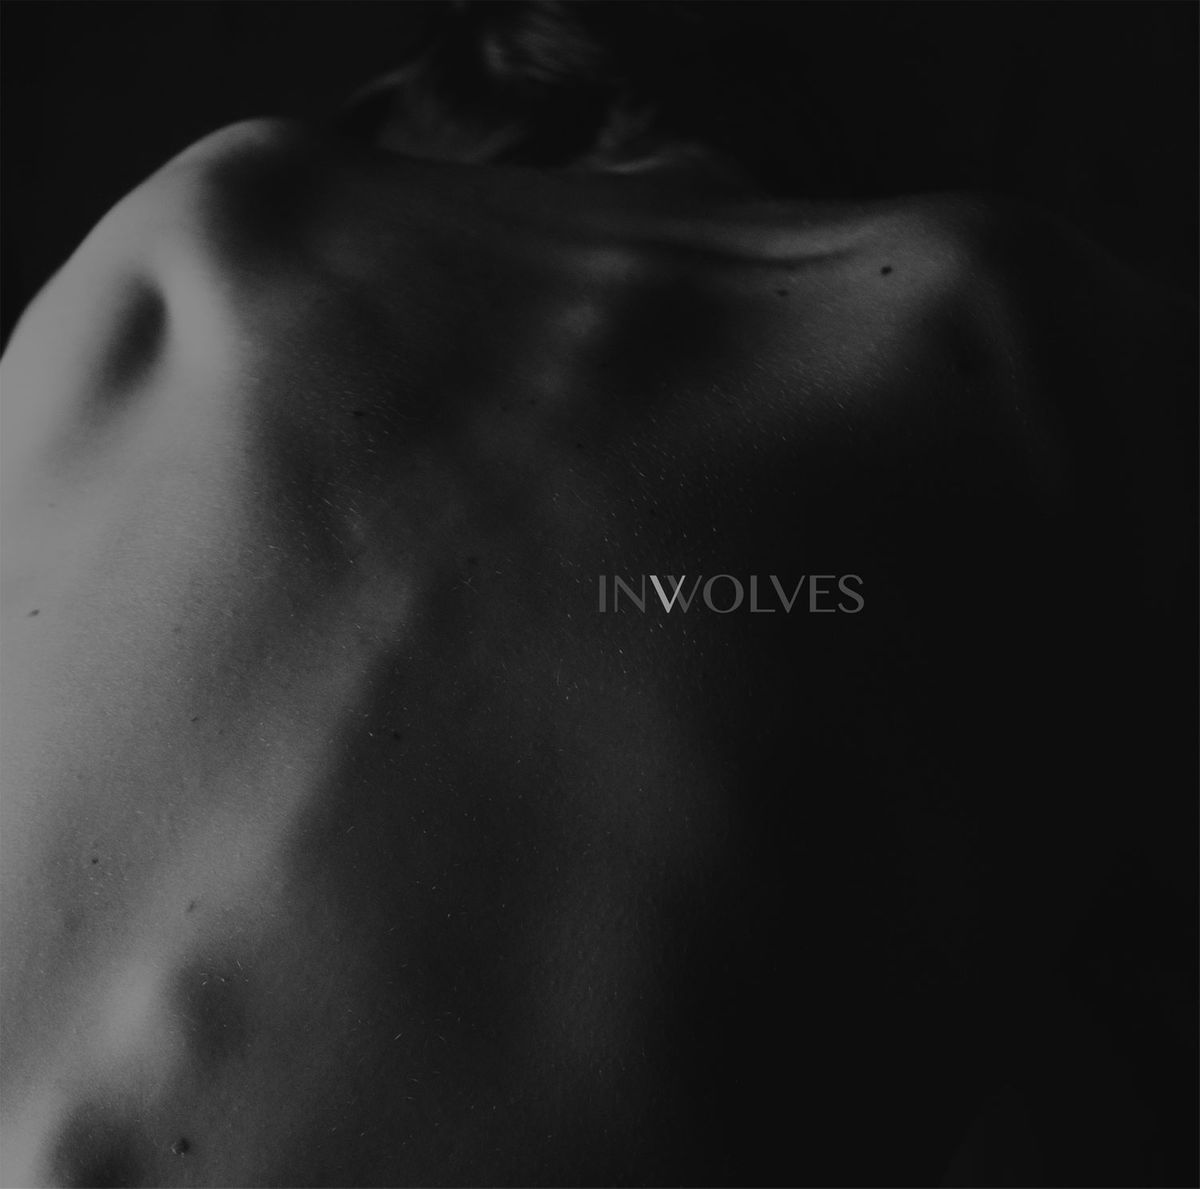 Inwolves